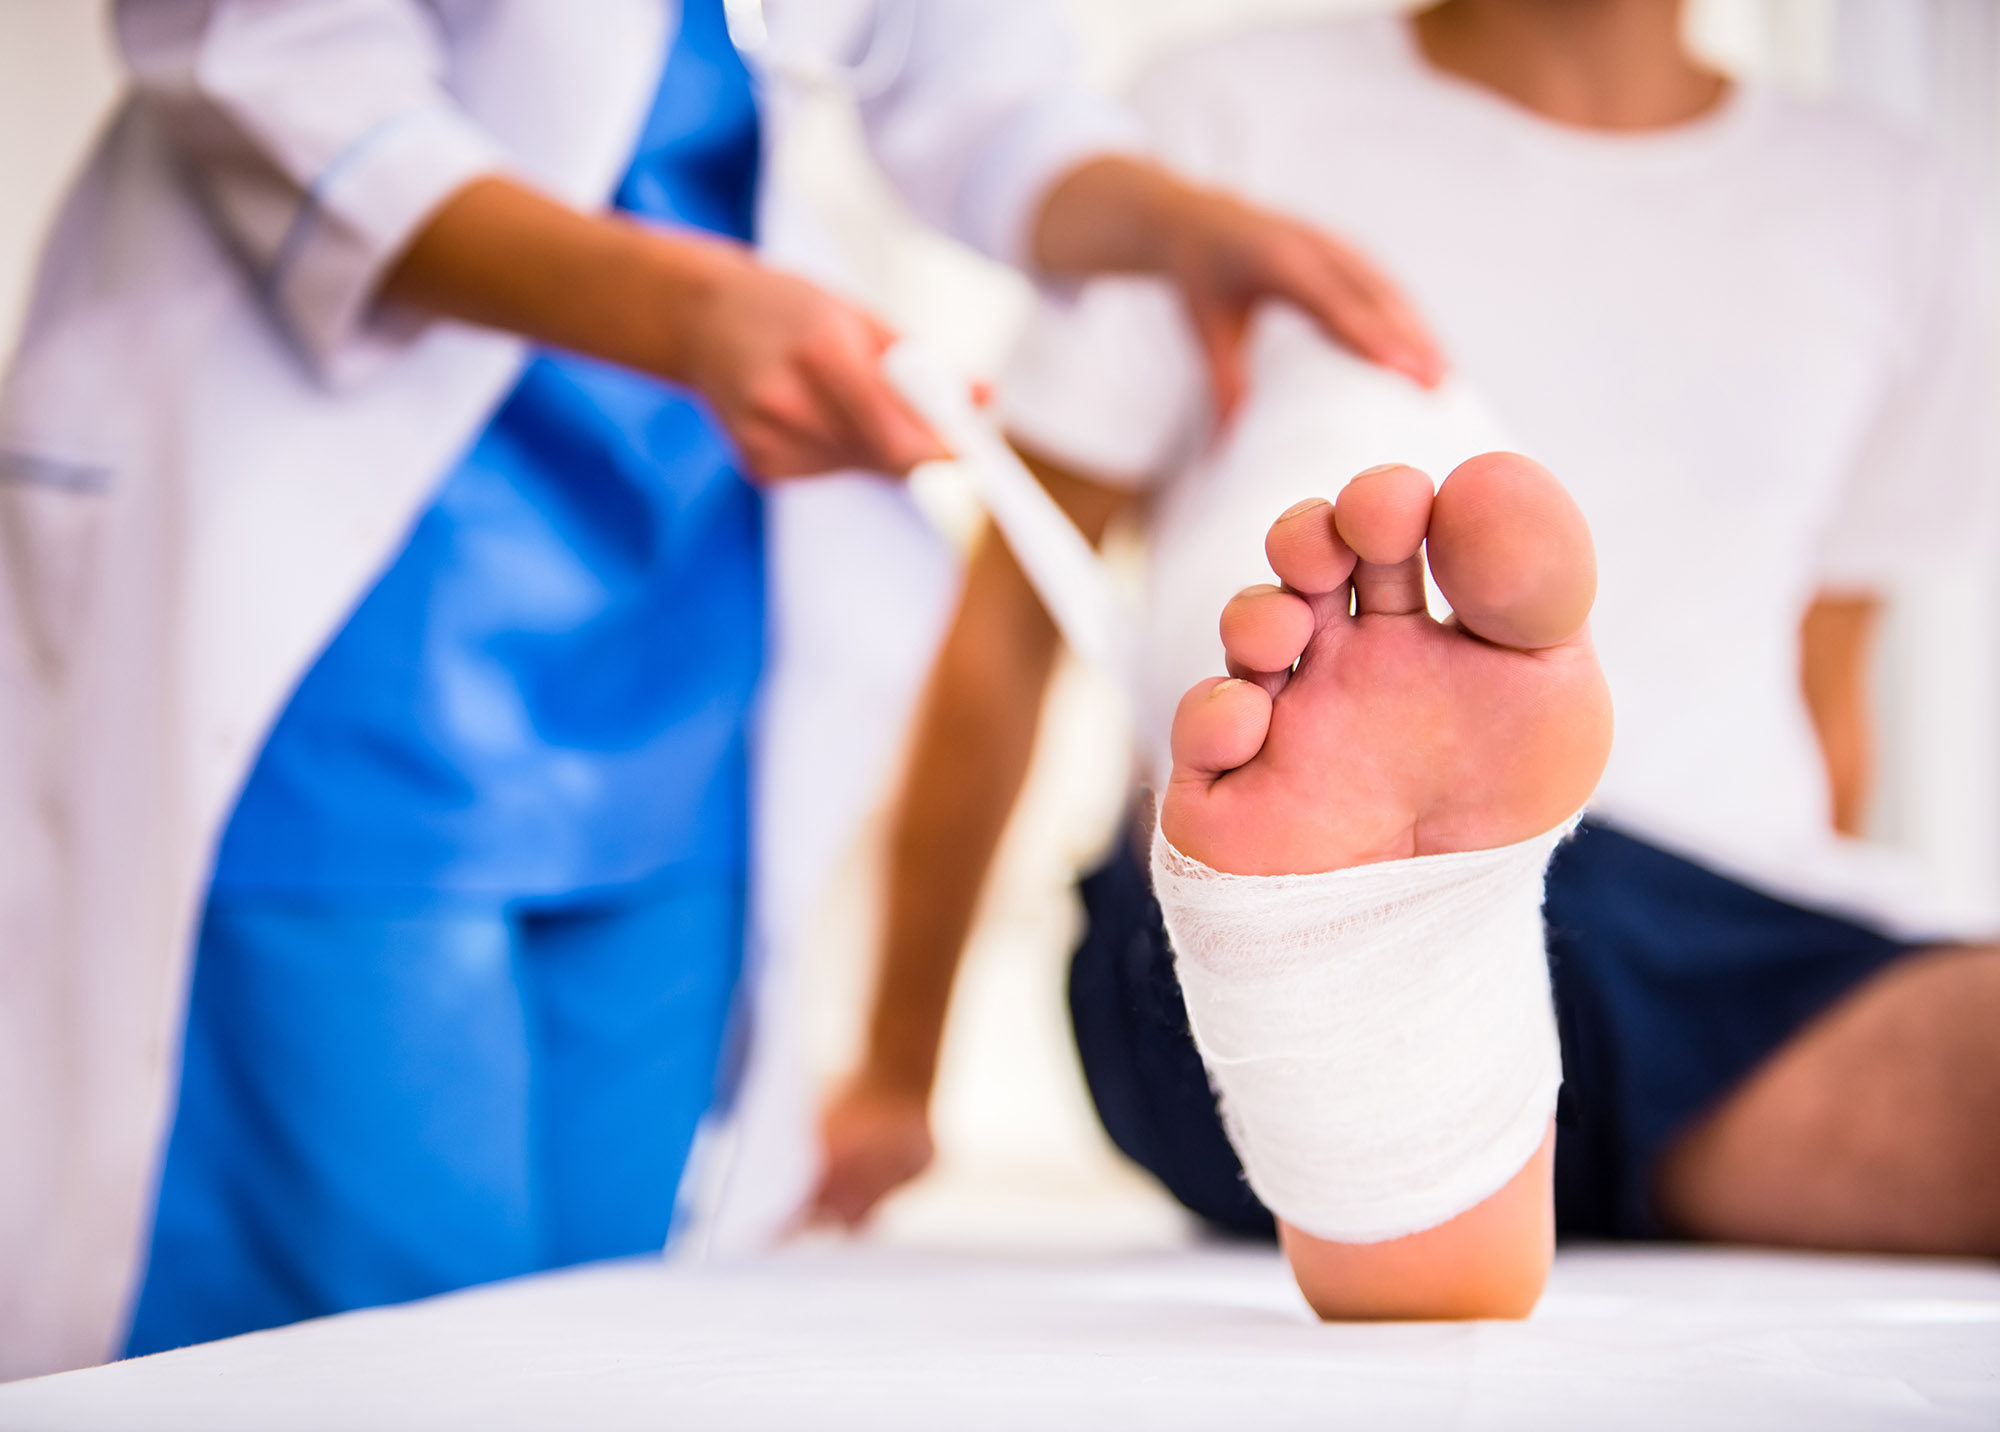 foot injury compensation, crush foot claims